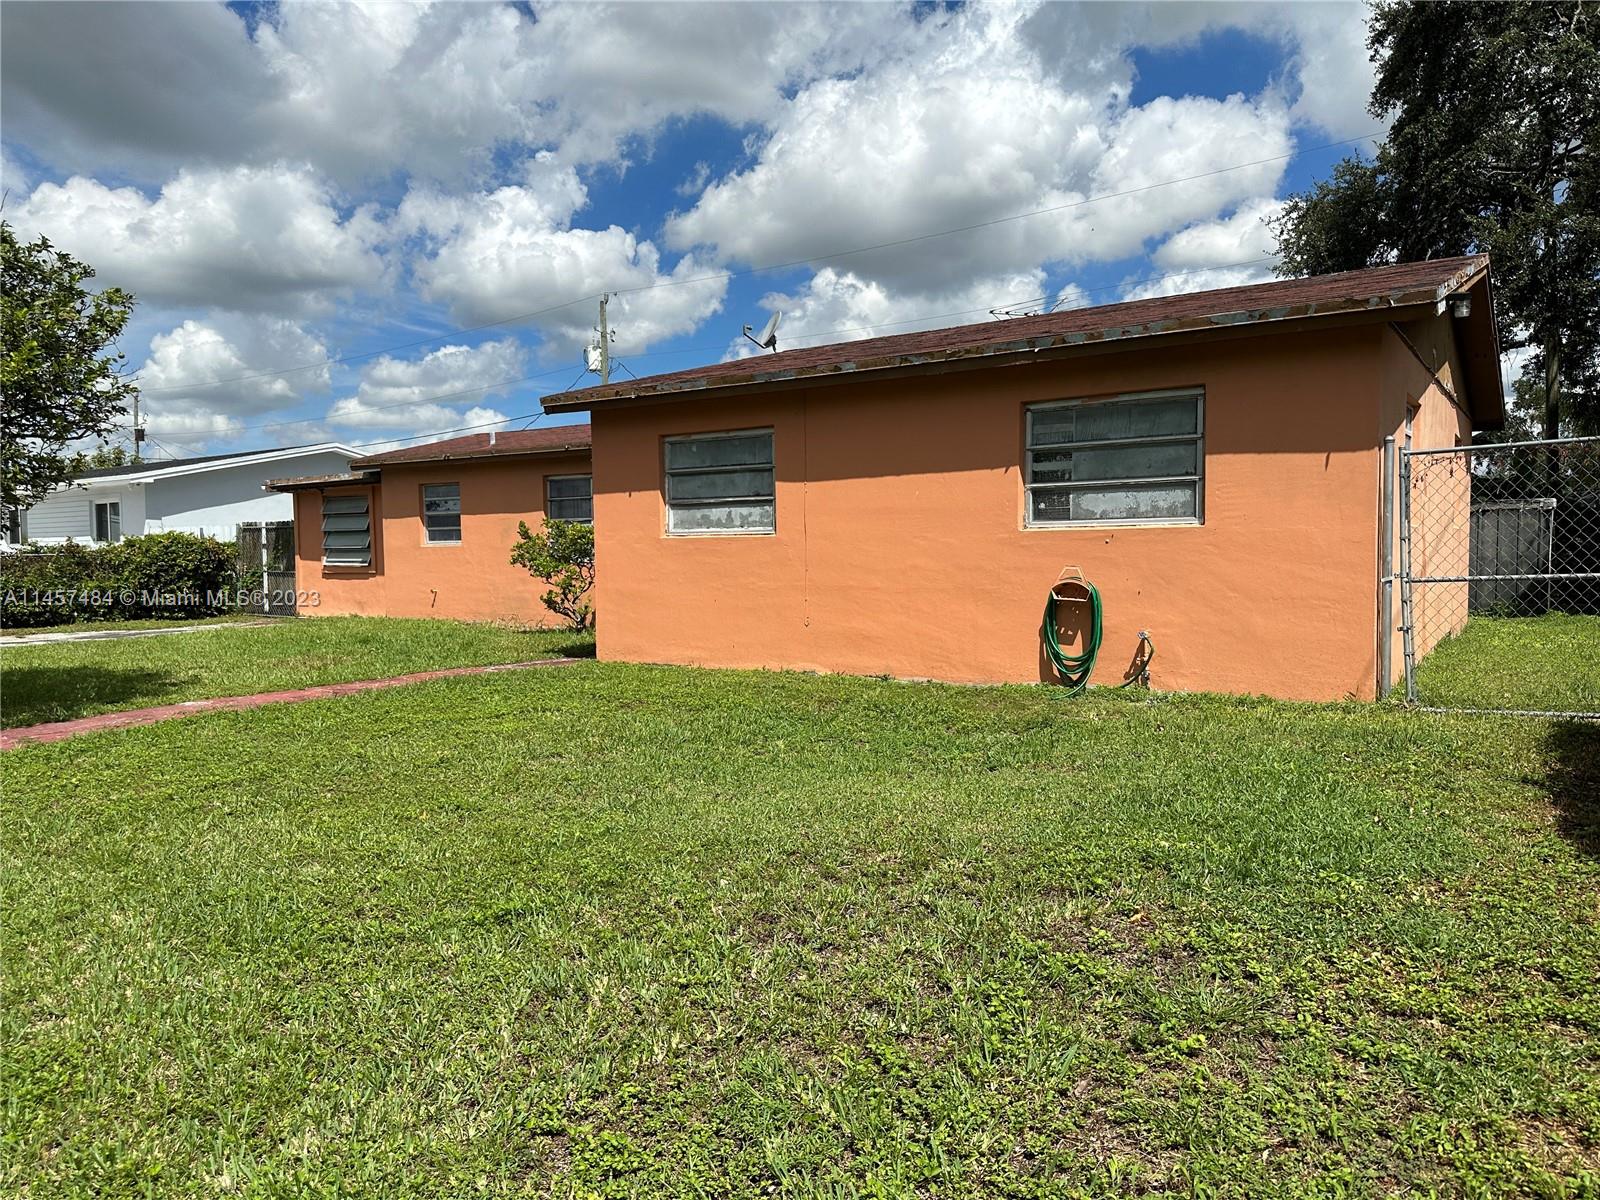 *** SLEEPING BEAUTY NEEDS A WAKE UP CALL - HANDYMAN SPECIAL - 3 BEDROOM, 2 BATH NEEDS ROOF, REPAIRS OF WALL AND CEILING IN CONVERTED CARPORT *** VERY SOLID HOME ONCE REPAIRED *** NO HOA FEES, LOW COST FLOOD INSURANCE AND WALKING DISTANCE TO SHOPPING, GOVERNMENT CENTER, AND TURNPIKE *** LOCATED IN RECENTLY INCORPORATED CUTLER BAY NEAR CUTLER BAY HIGH SCHOOL AND POPULAR BLACK POINT MARINA ***